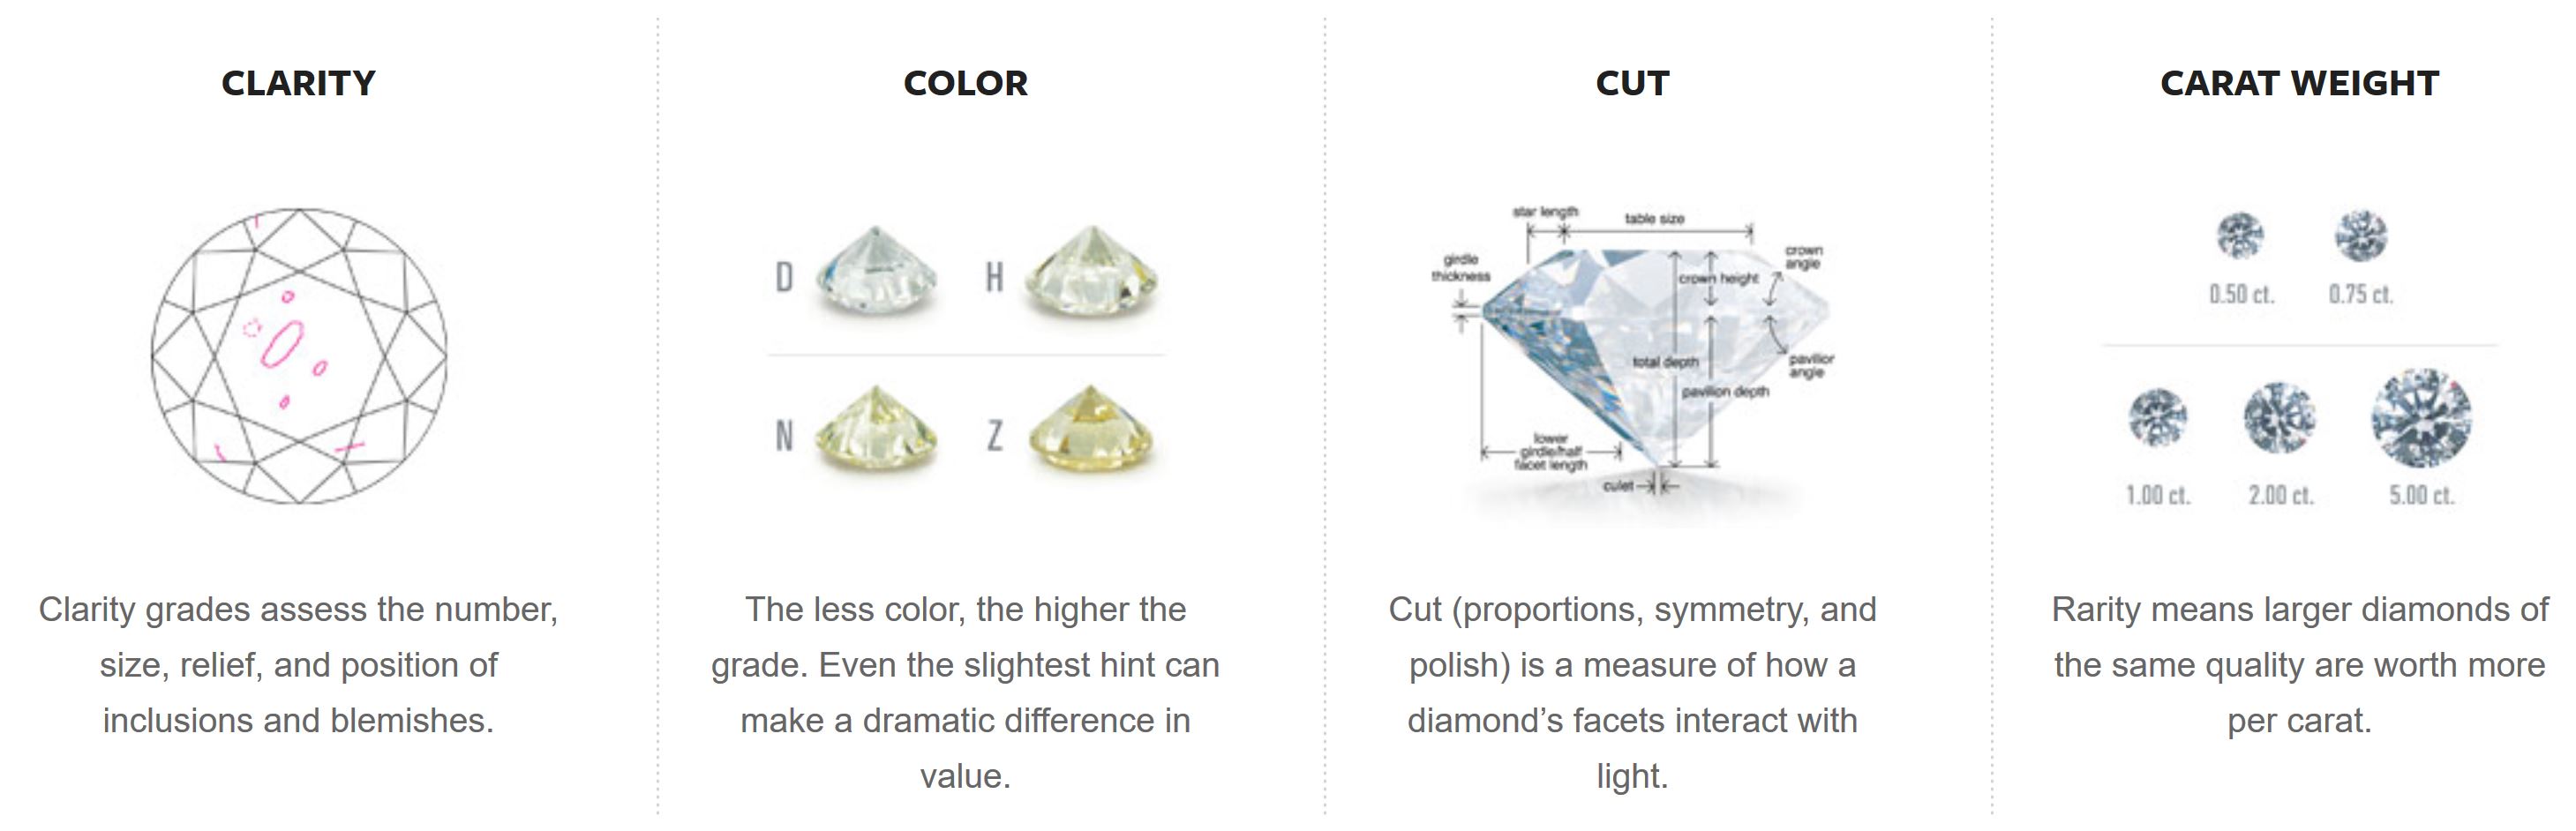 Diamond Metrics for Quality. Four of the ways diamonds are factored and rated. Clarity, Color, Cut, and Carat. From Gemological Appraisal Industry. (2018). Diamond Education. Retrieved from: https://gailab.org/content/diamond-education